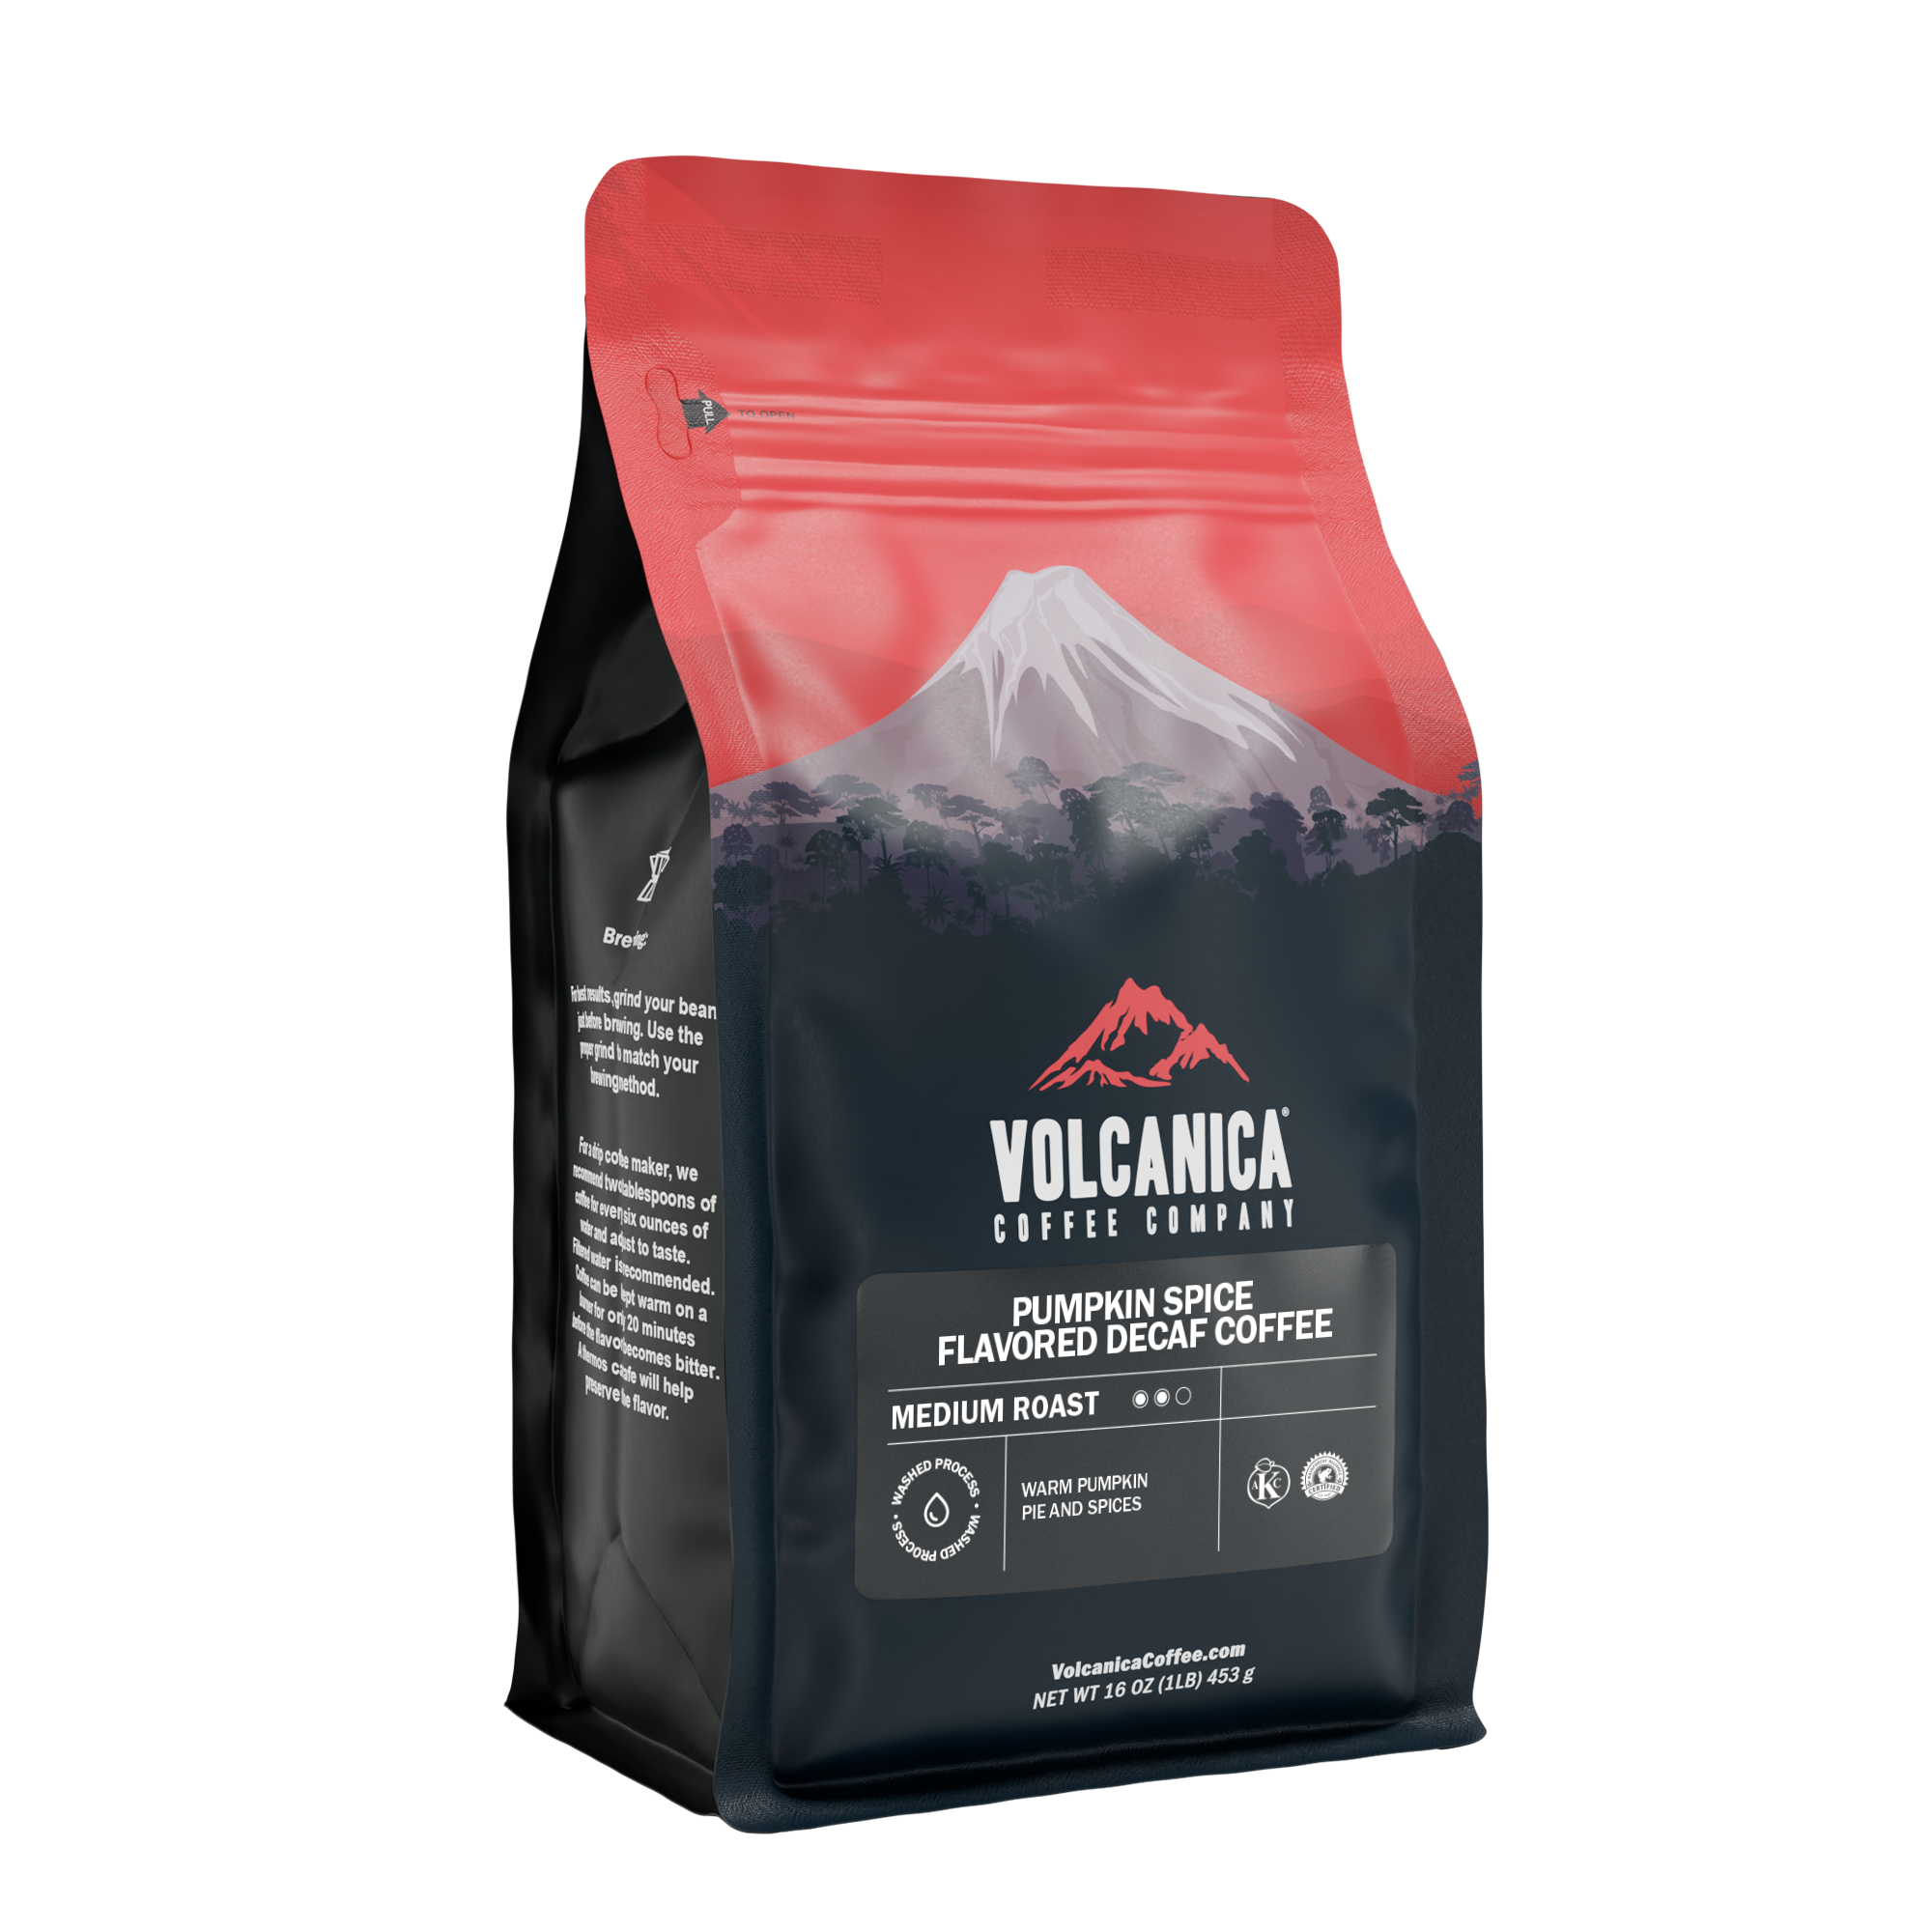 Pumpkin Spice Flavored Decaf Coffee - Volcanica Coffee